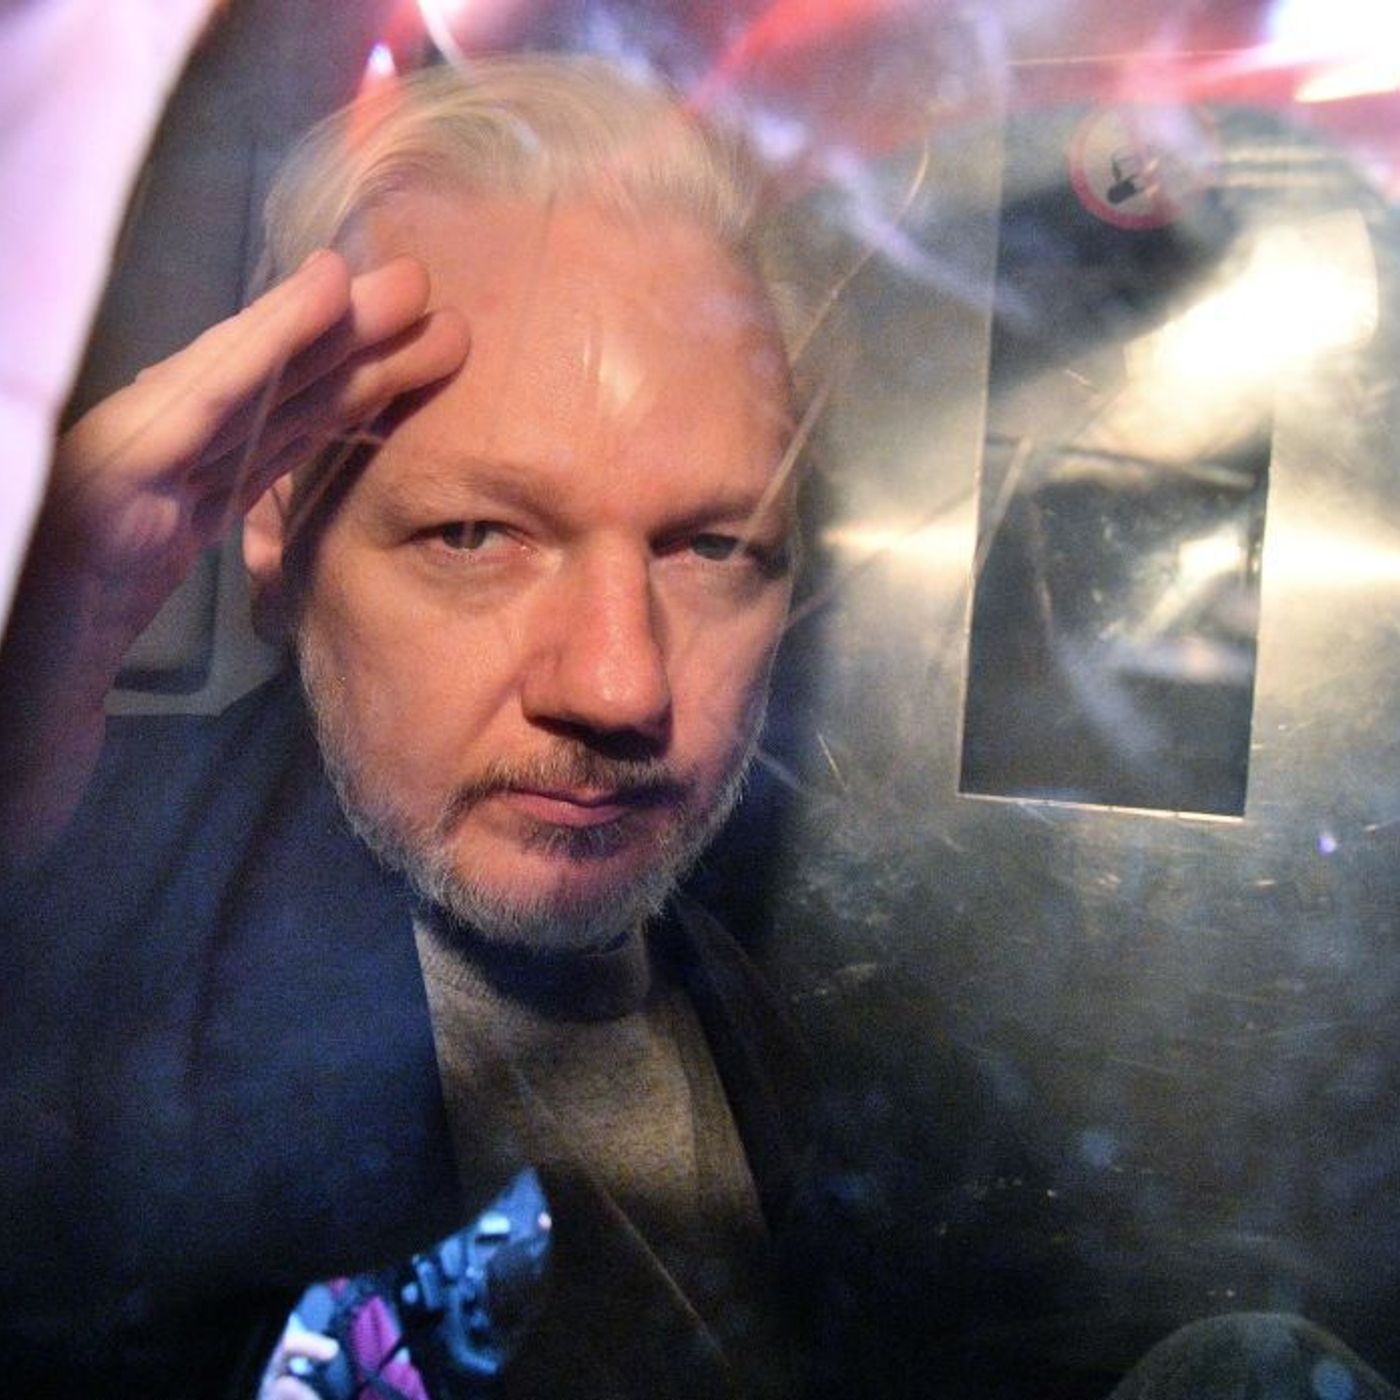 Should Julian Assange be extradited to America?